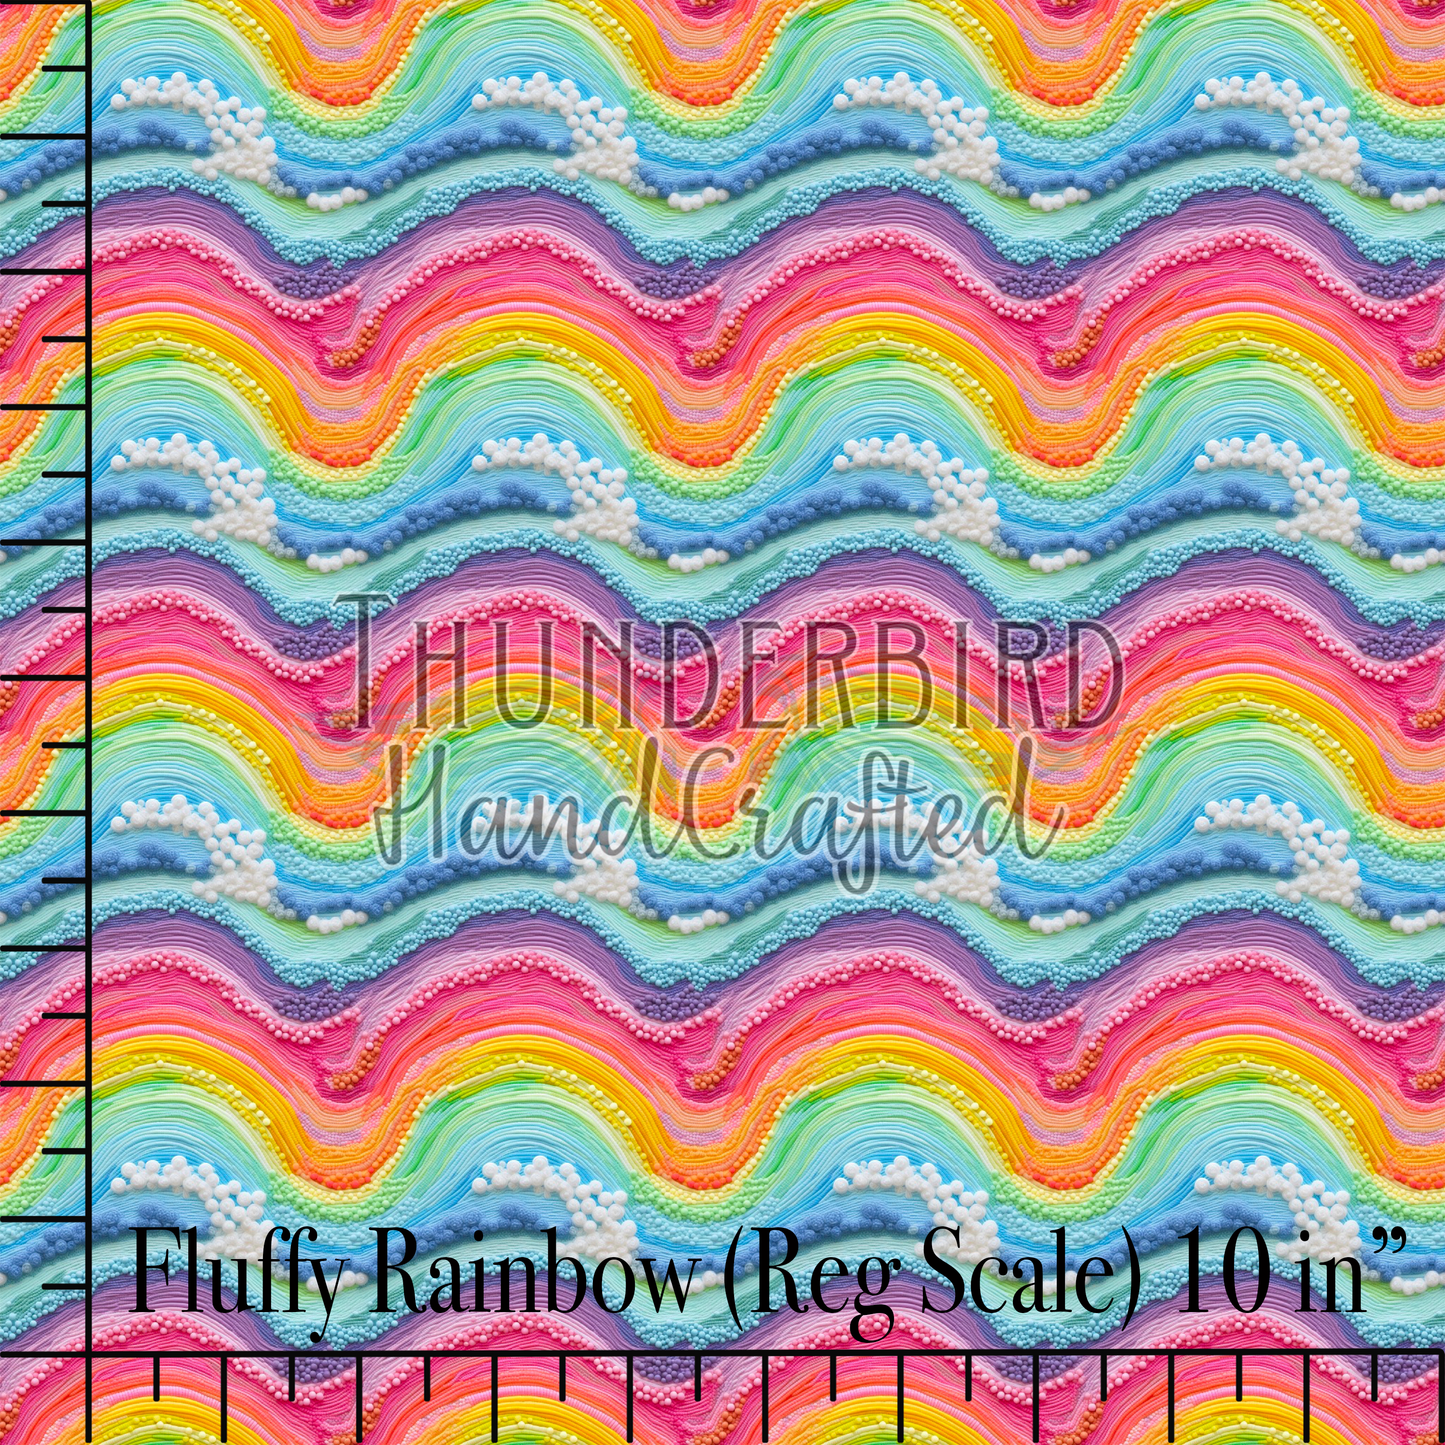 Fluffy Rainbow (Reg Size) - Size from Previous Orders